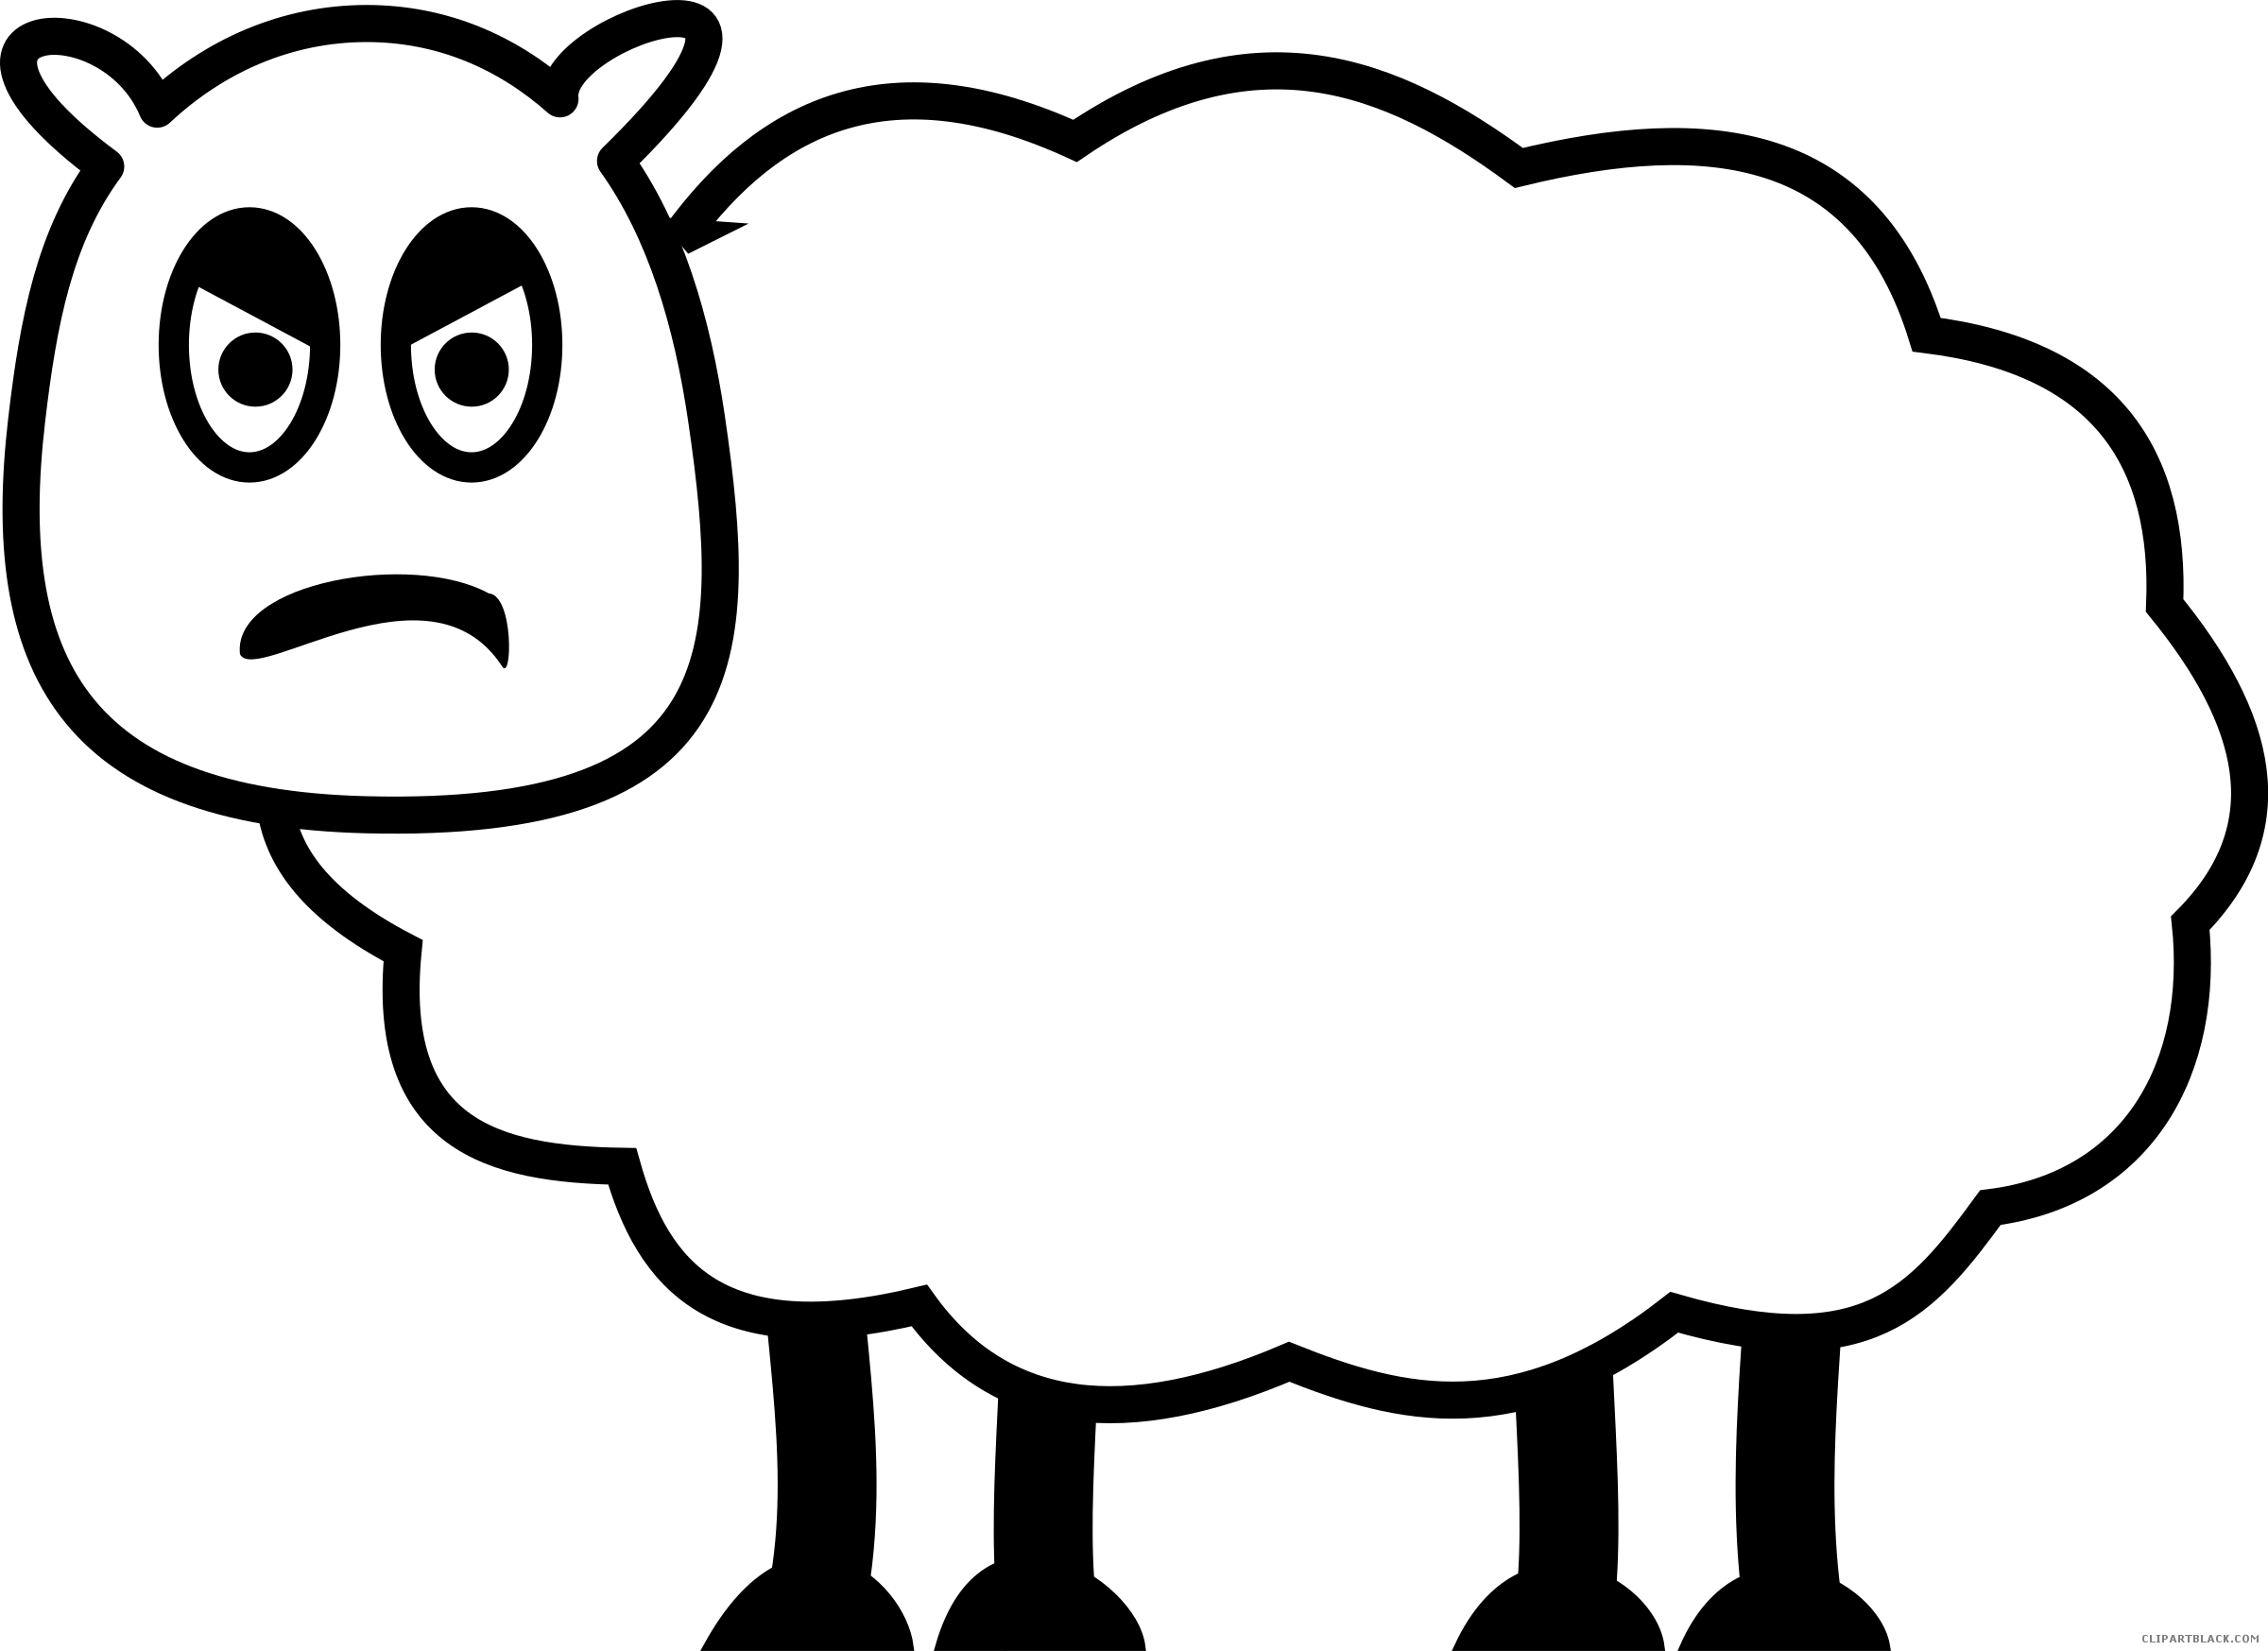 Sheep Outline Animal Free Black White Clipart Images - Sheep (2400x1747)